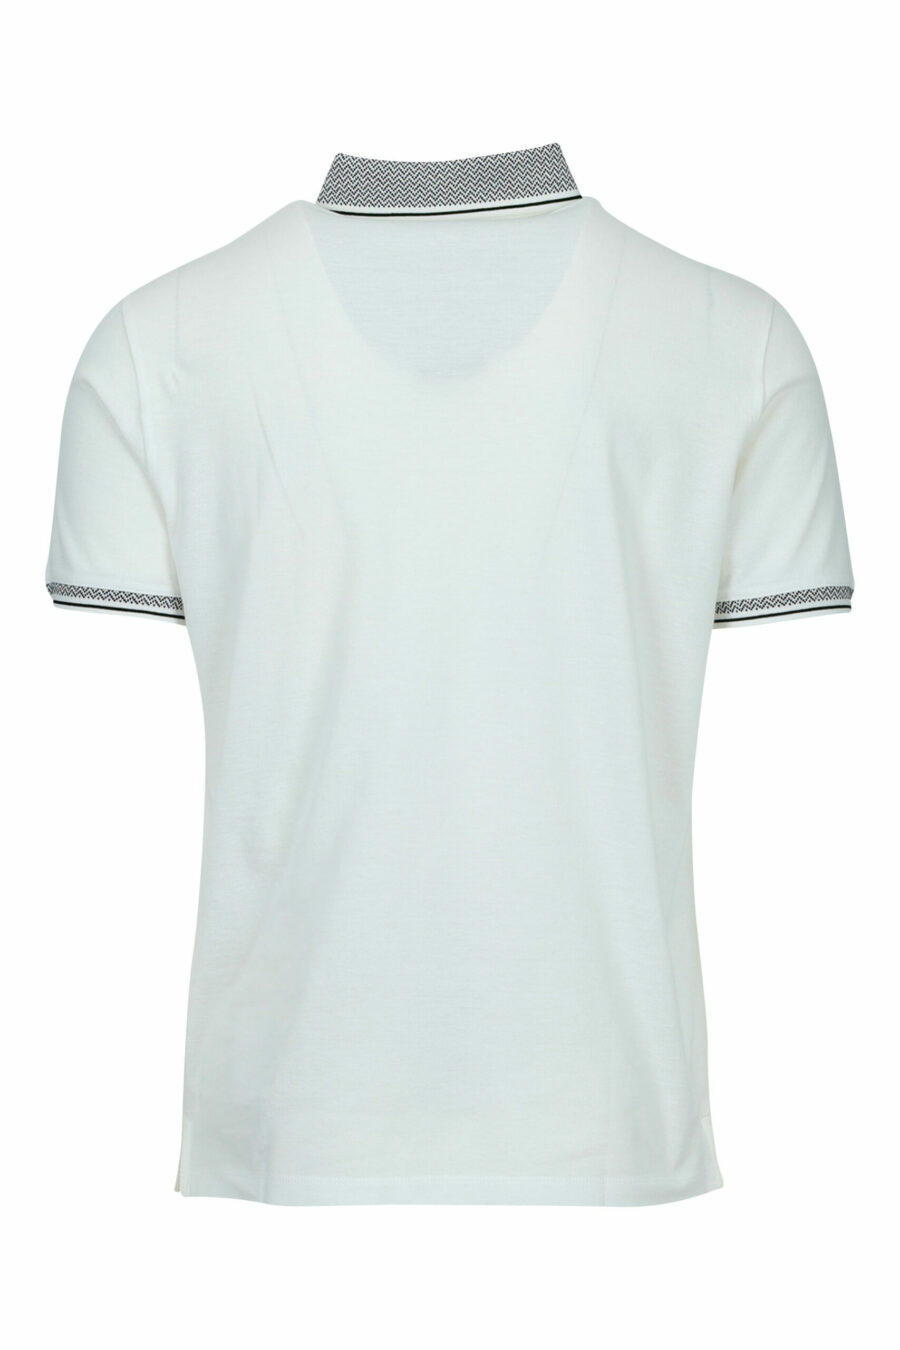 White polo shirt with classic grey collar - 8058947967995 1 scaled